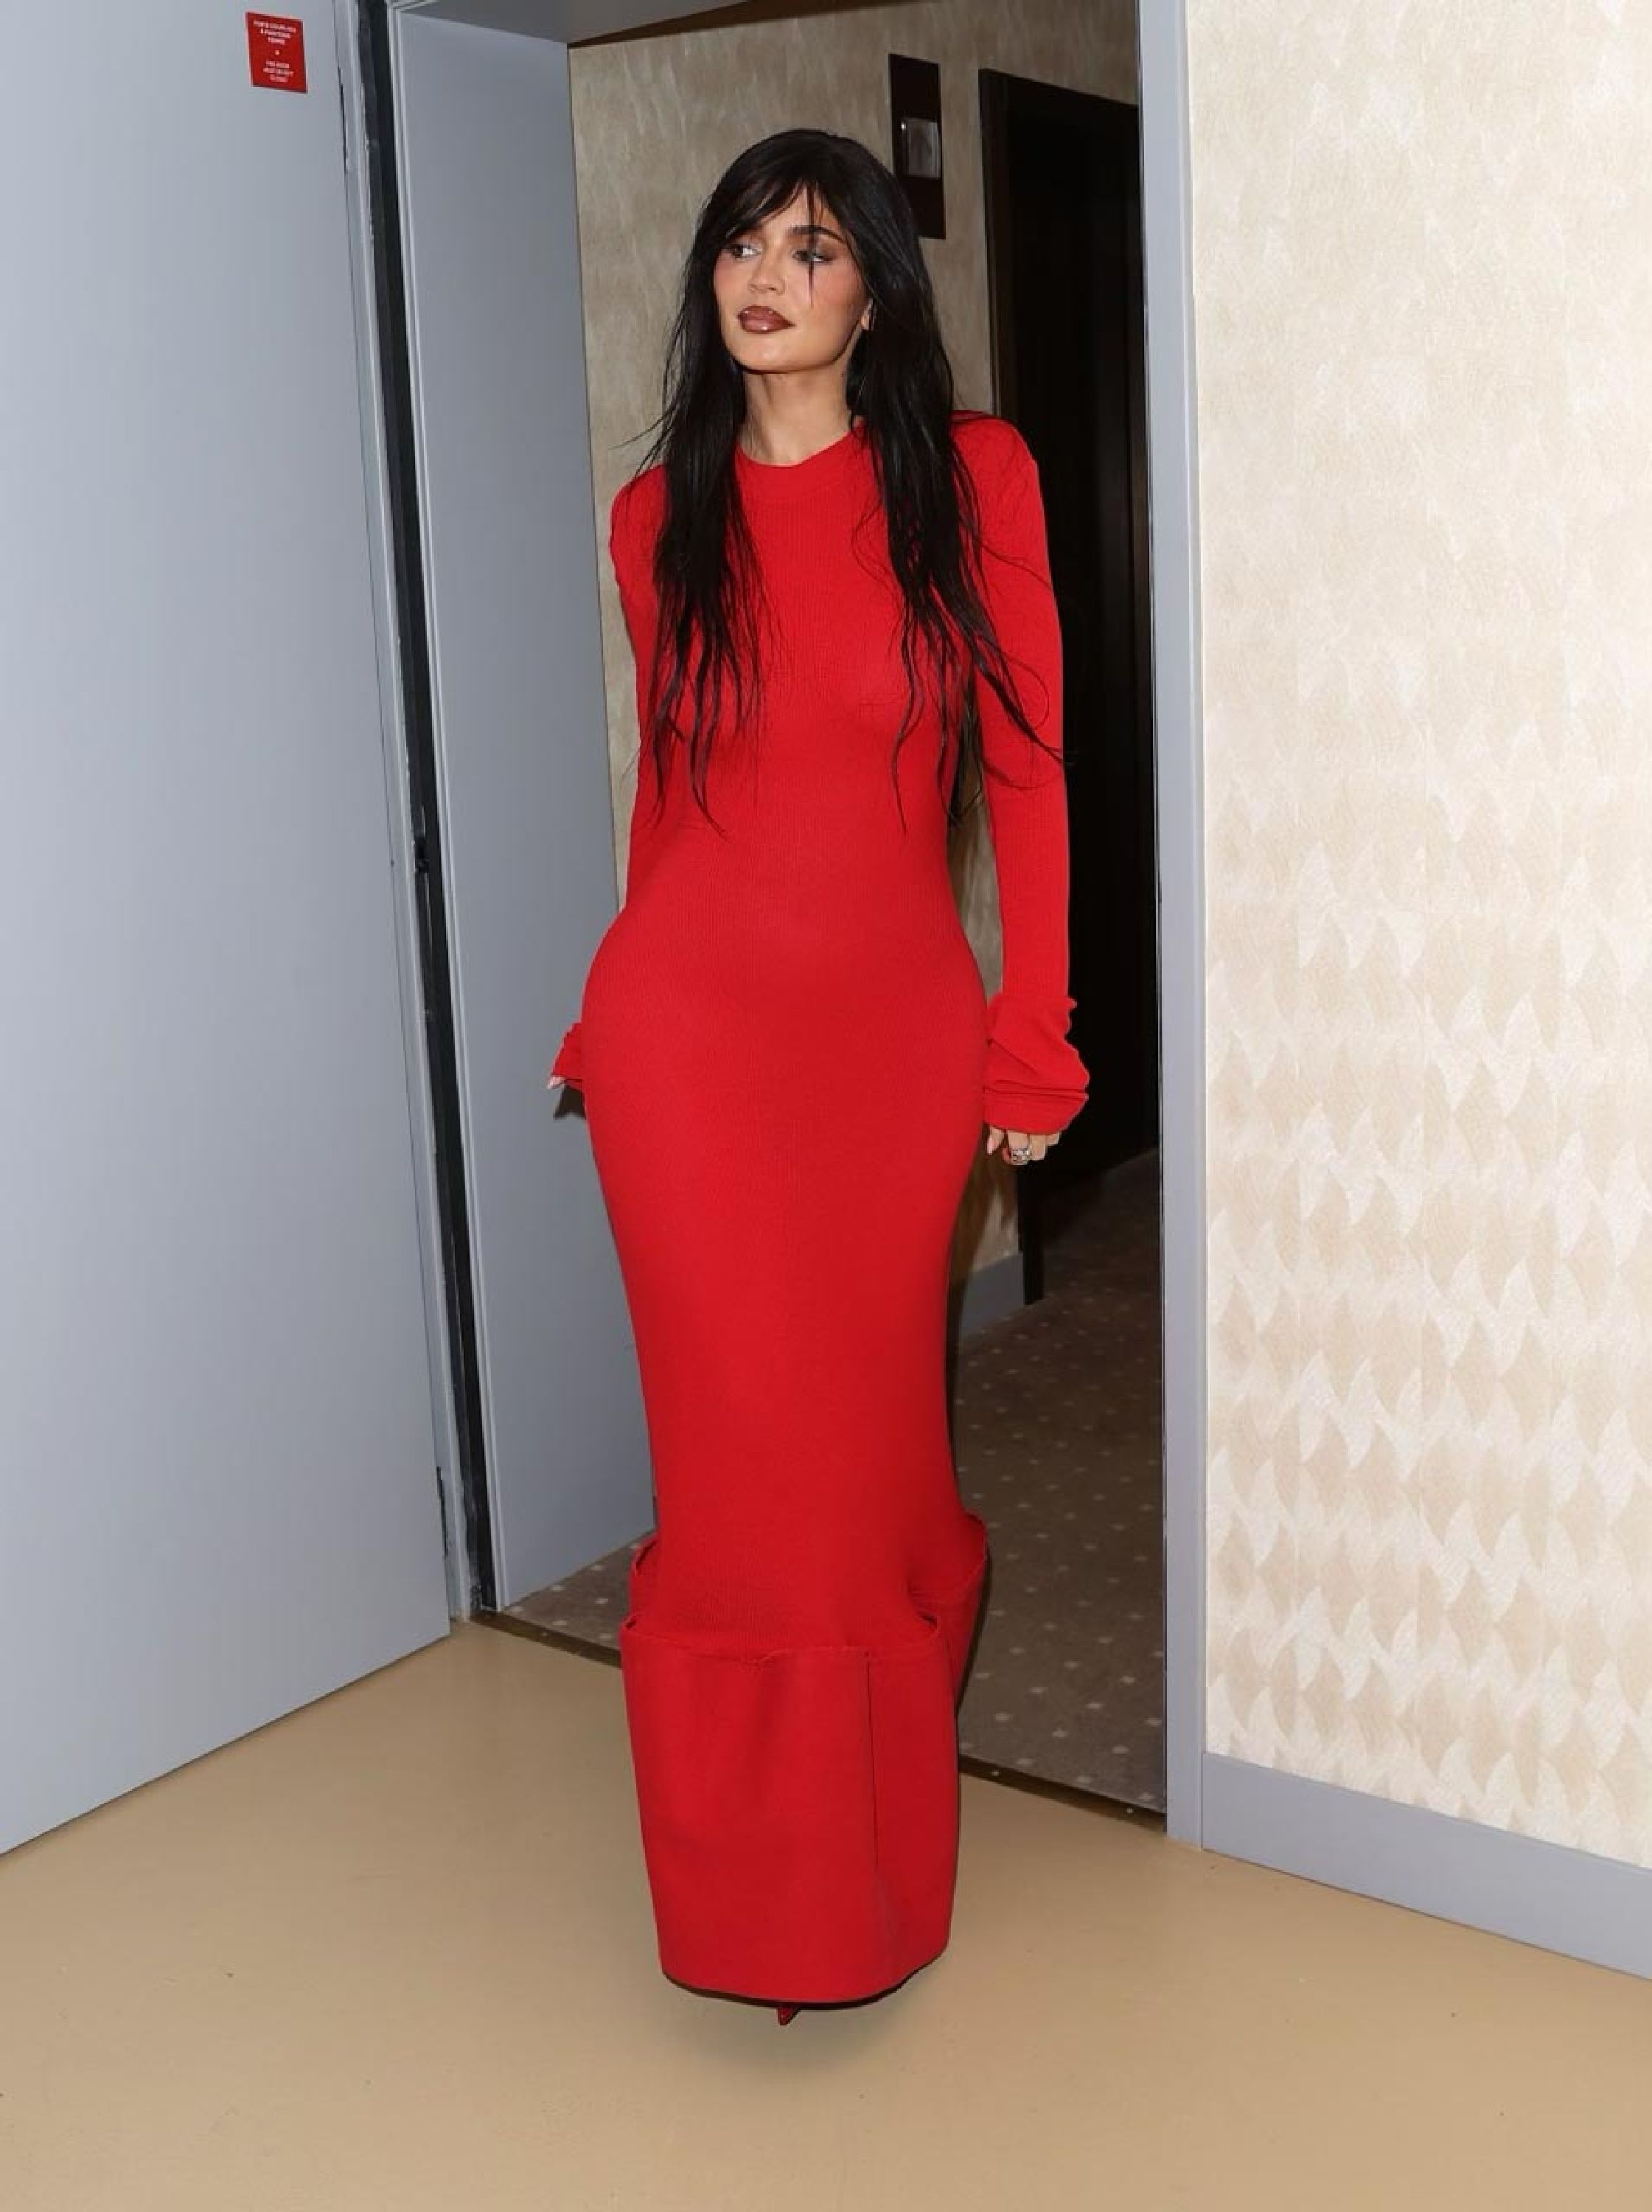 Kylie Jenner Rise And Shine Chanel Sweater Dress